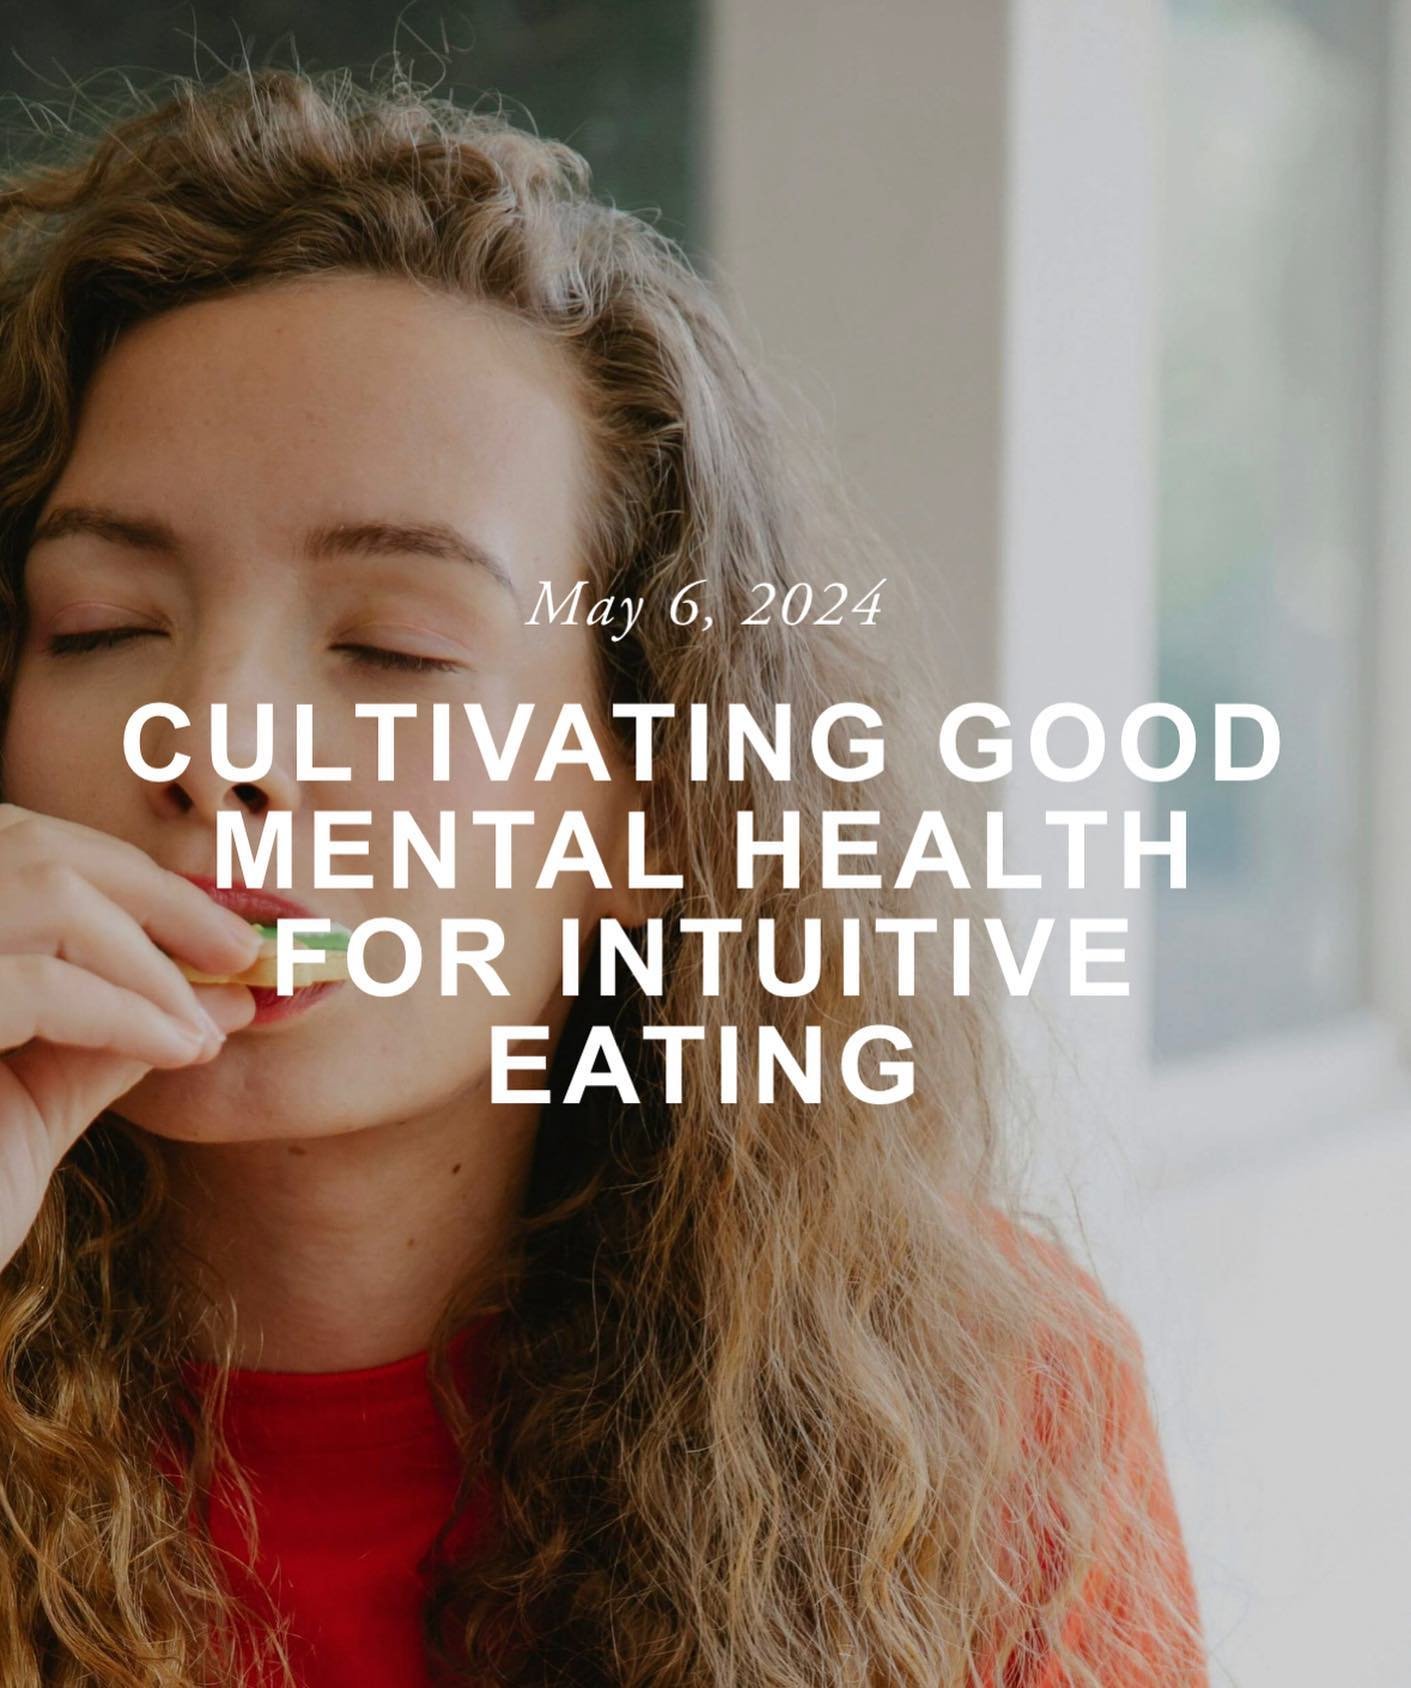 If you want to learn how to eat intuitively, this is the blog for you!

&ldquo;Intuitive eating is simple. It feels natural. You eat when you are hungry, and stop eating when you are full. No foods are off-limits and common food labels, such as &ldqu